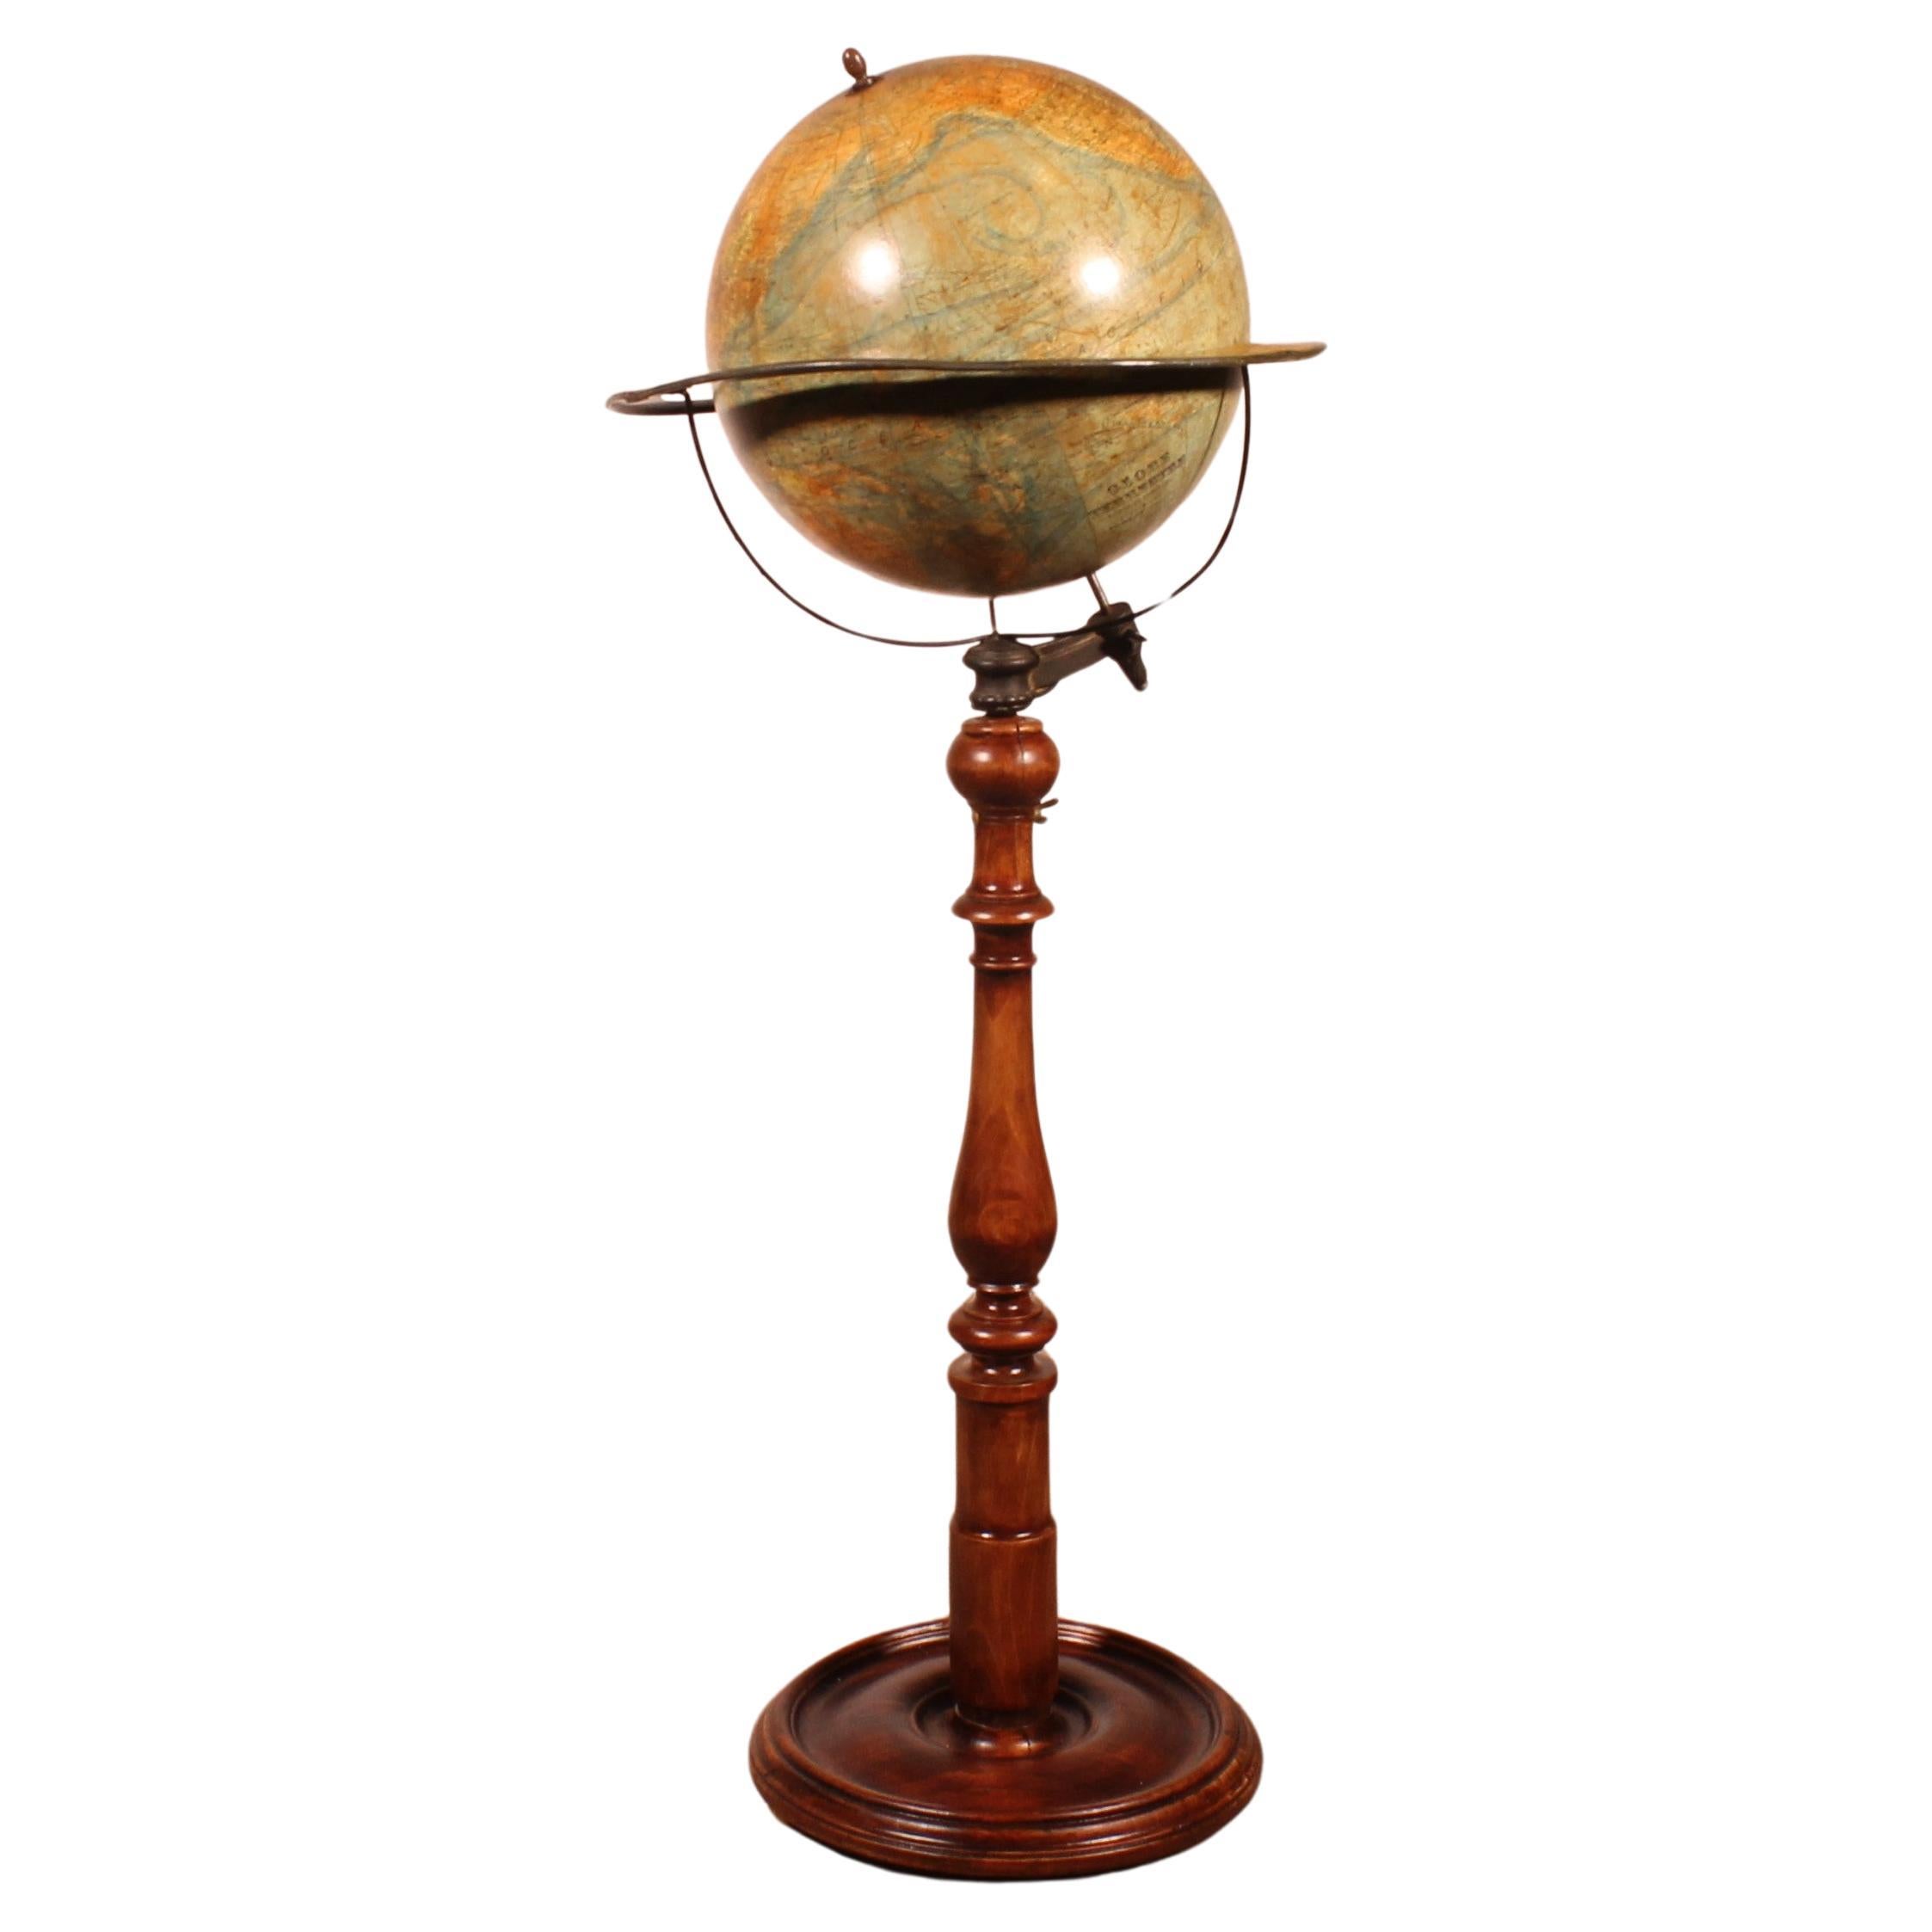 A Library Terrestrial Globe On Stand From J.forest Paris From The 19th Century